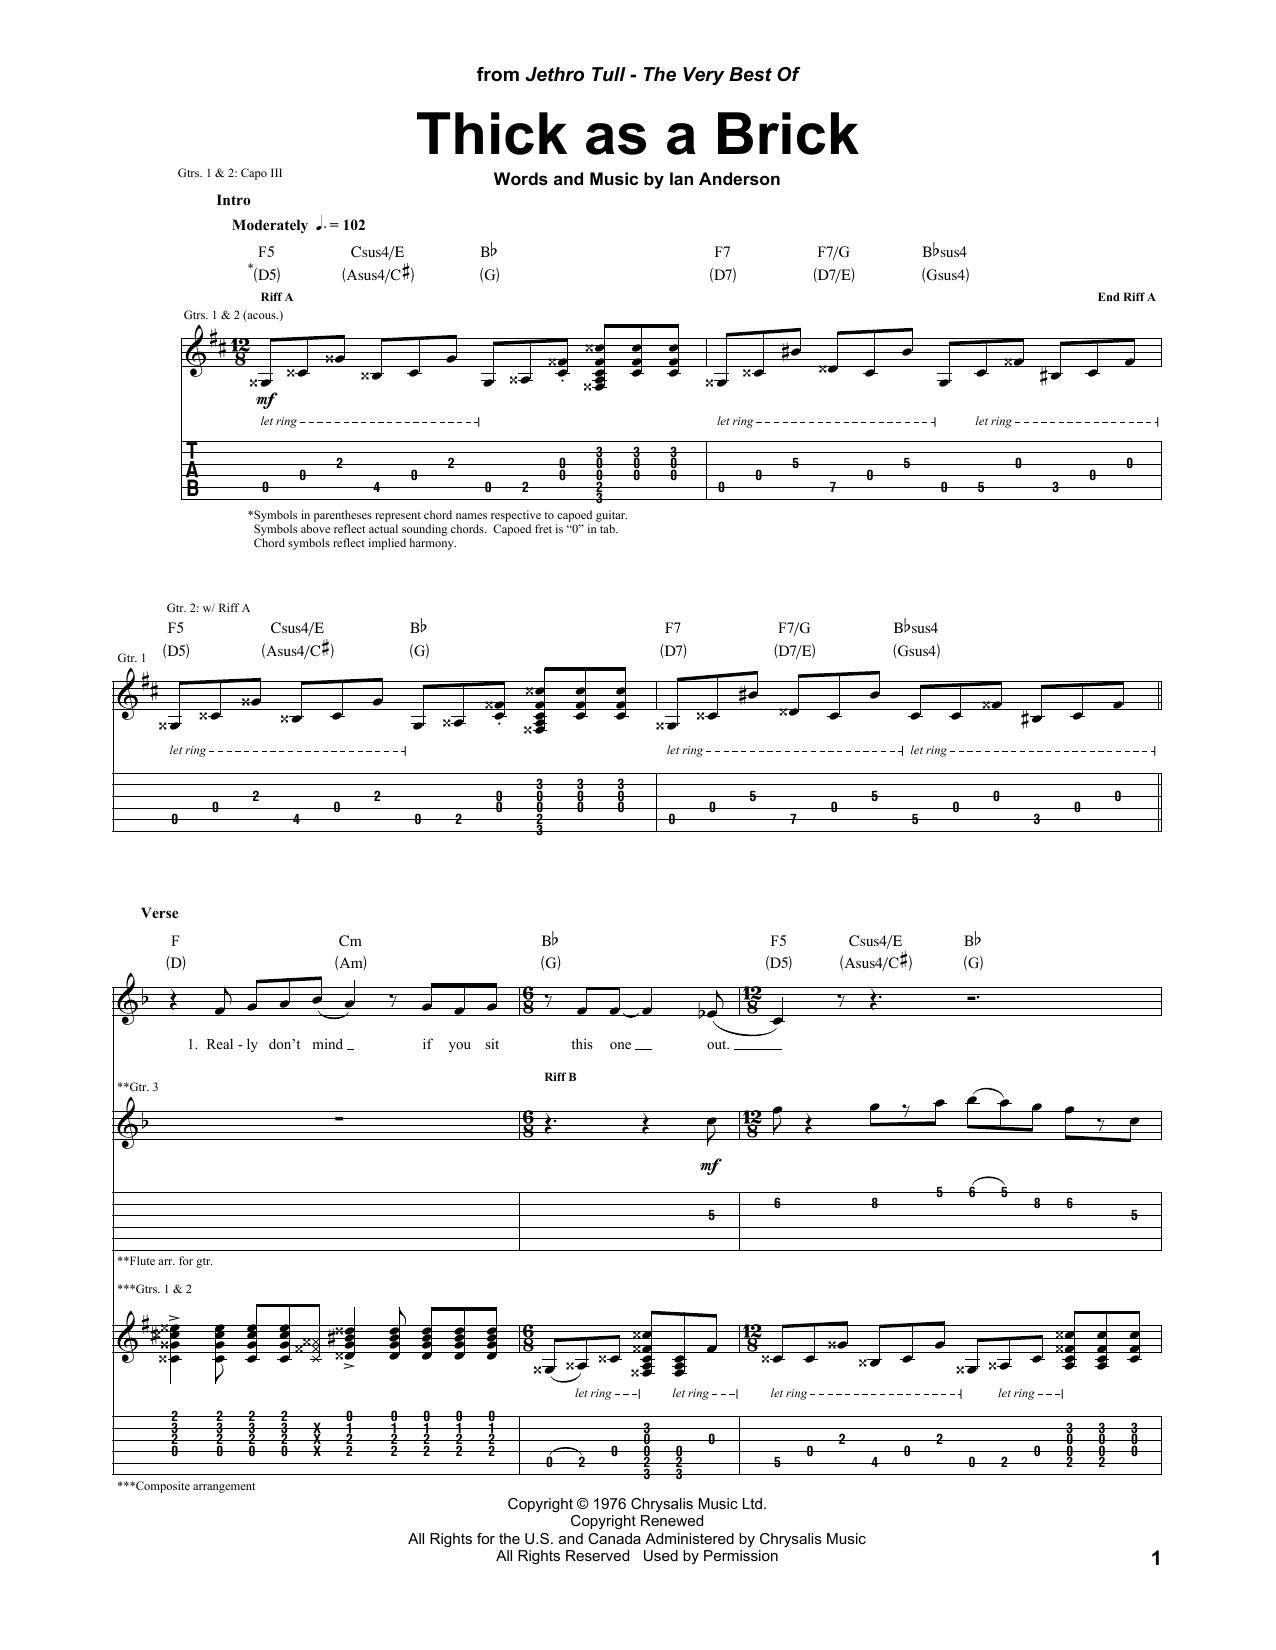 Download Jethro Tull Thick As A Brick Sheet Music